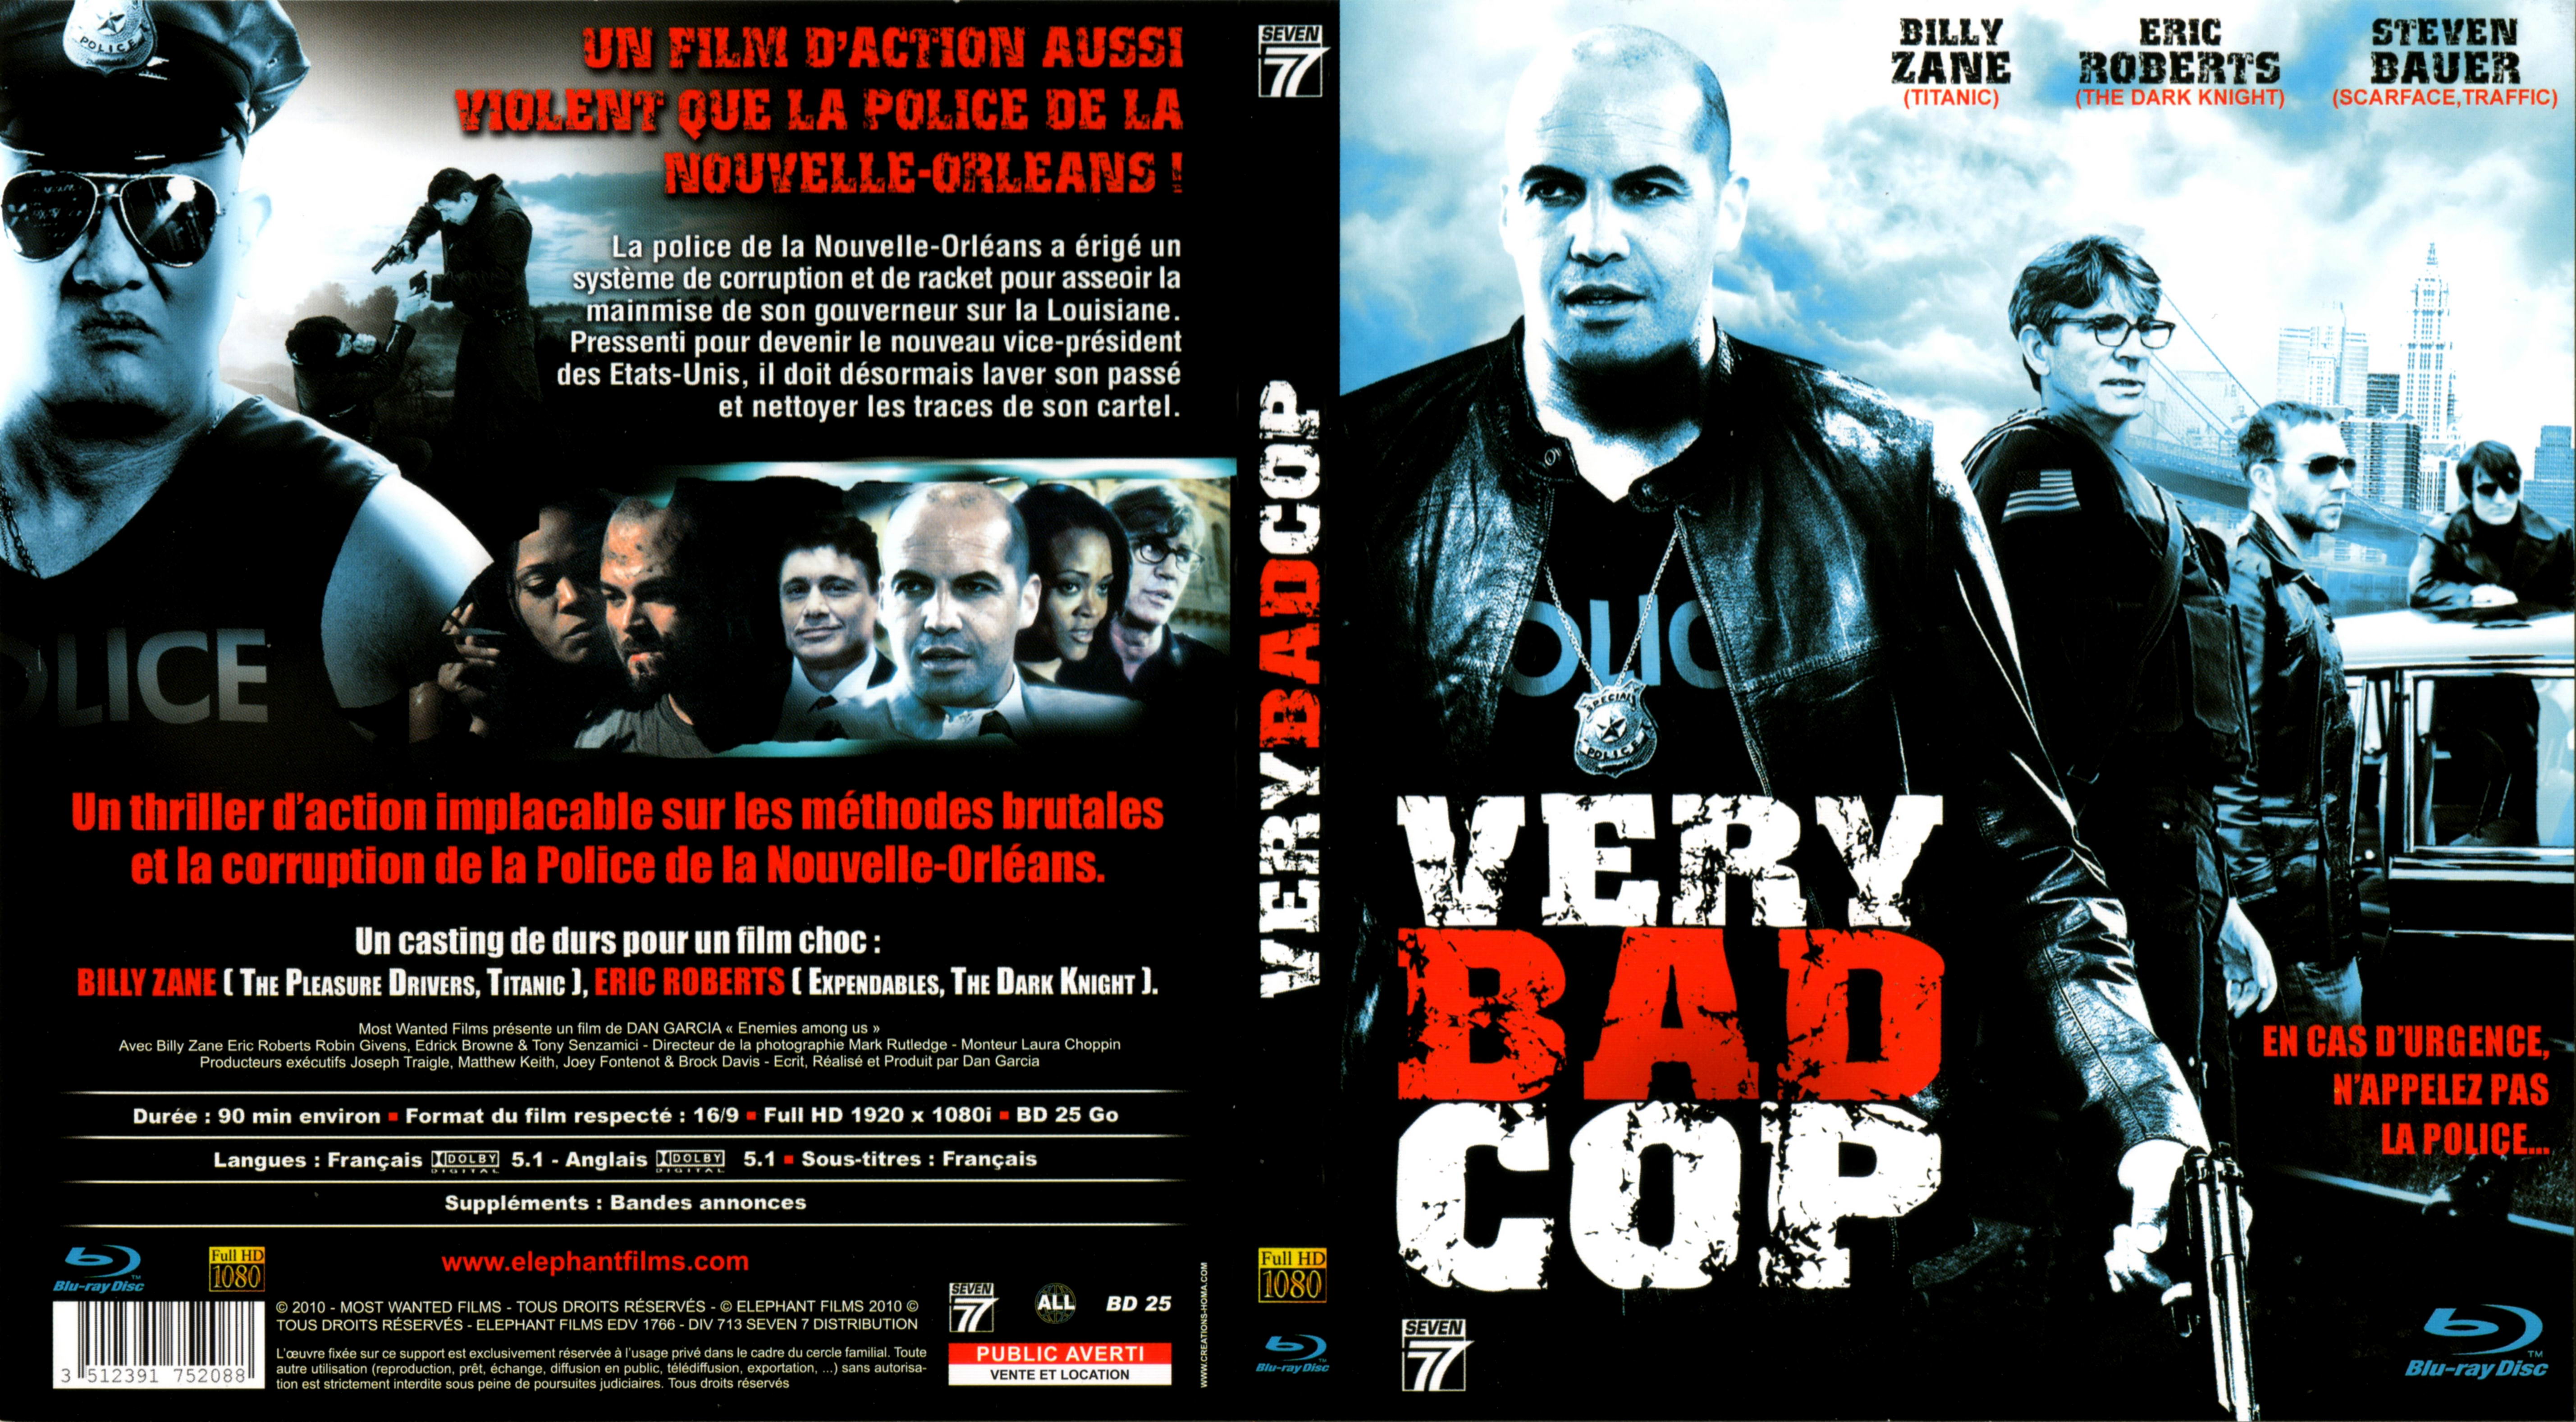 Jaquette DVD Very bad cop (BLU-RAY)